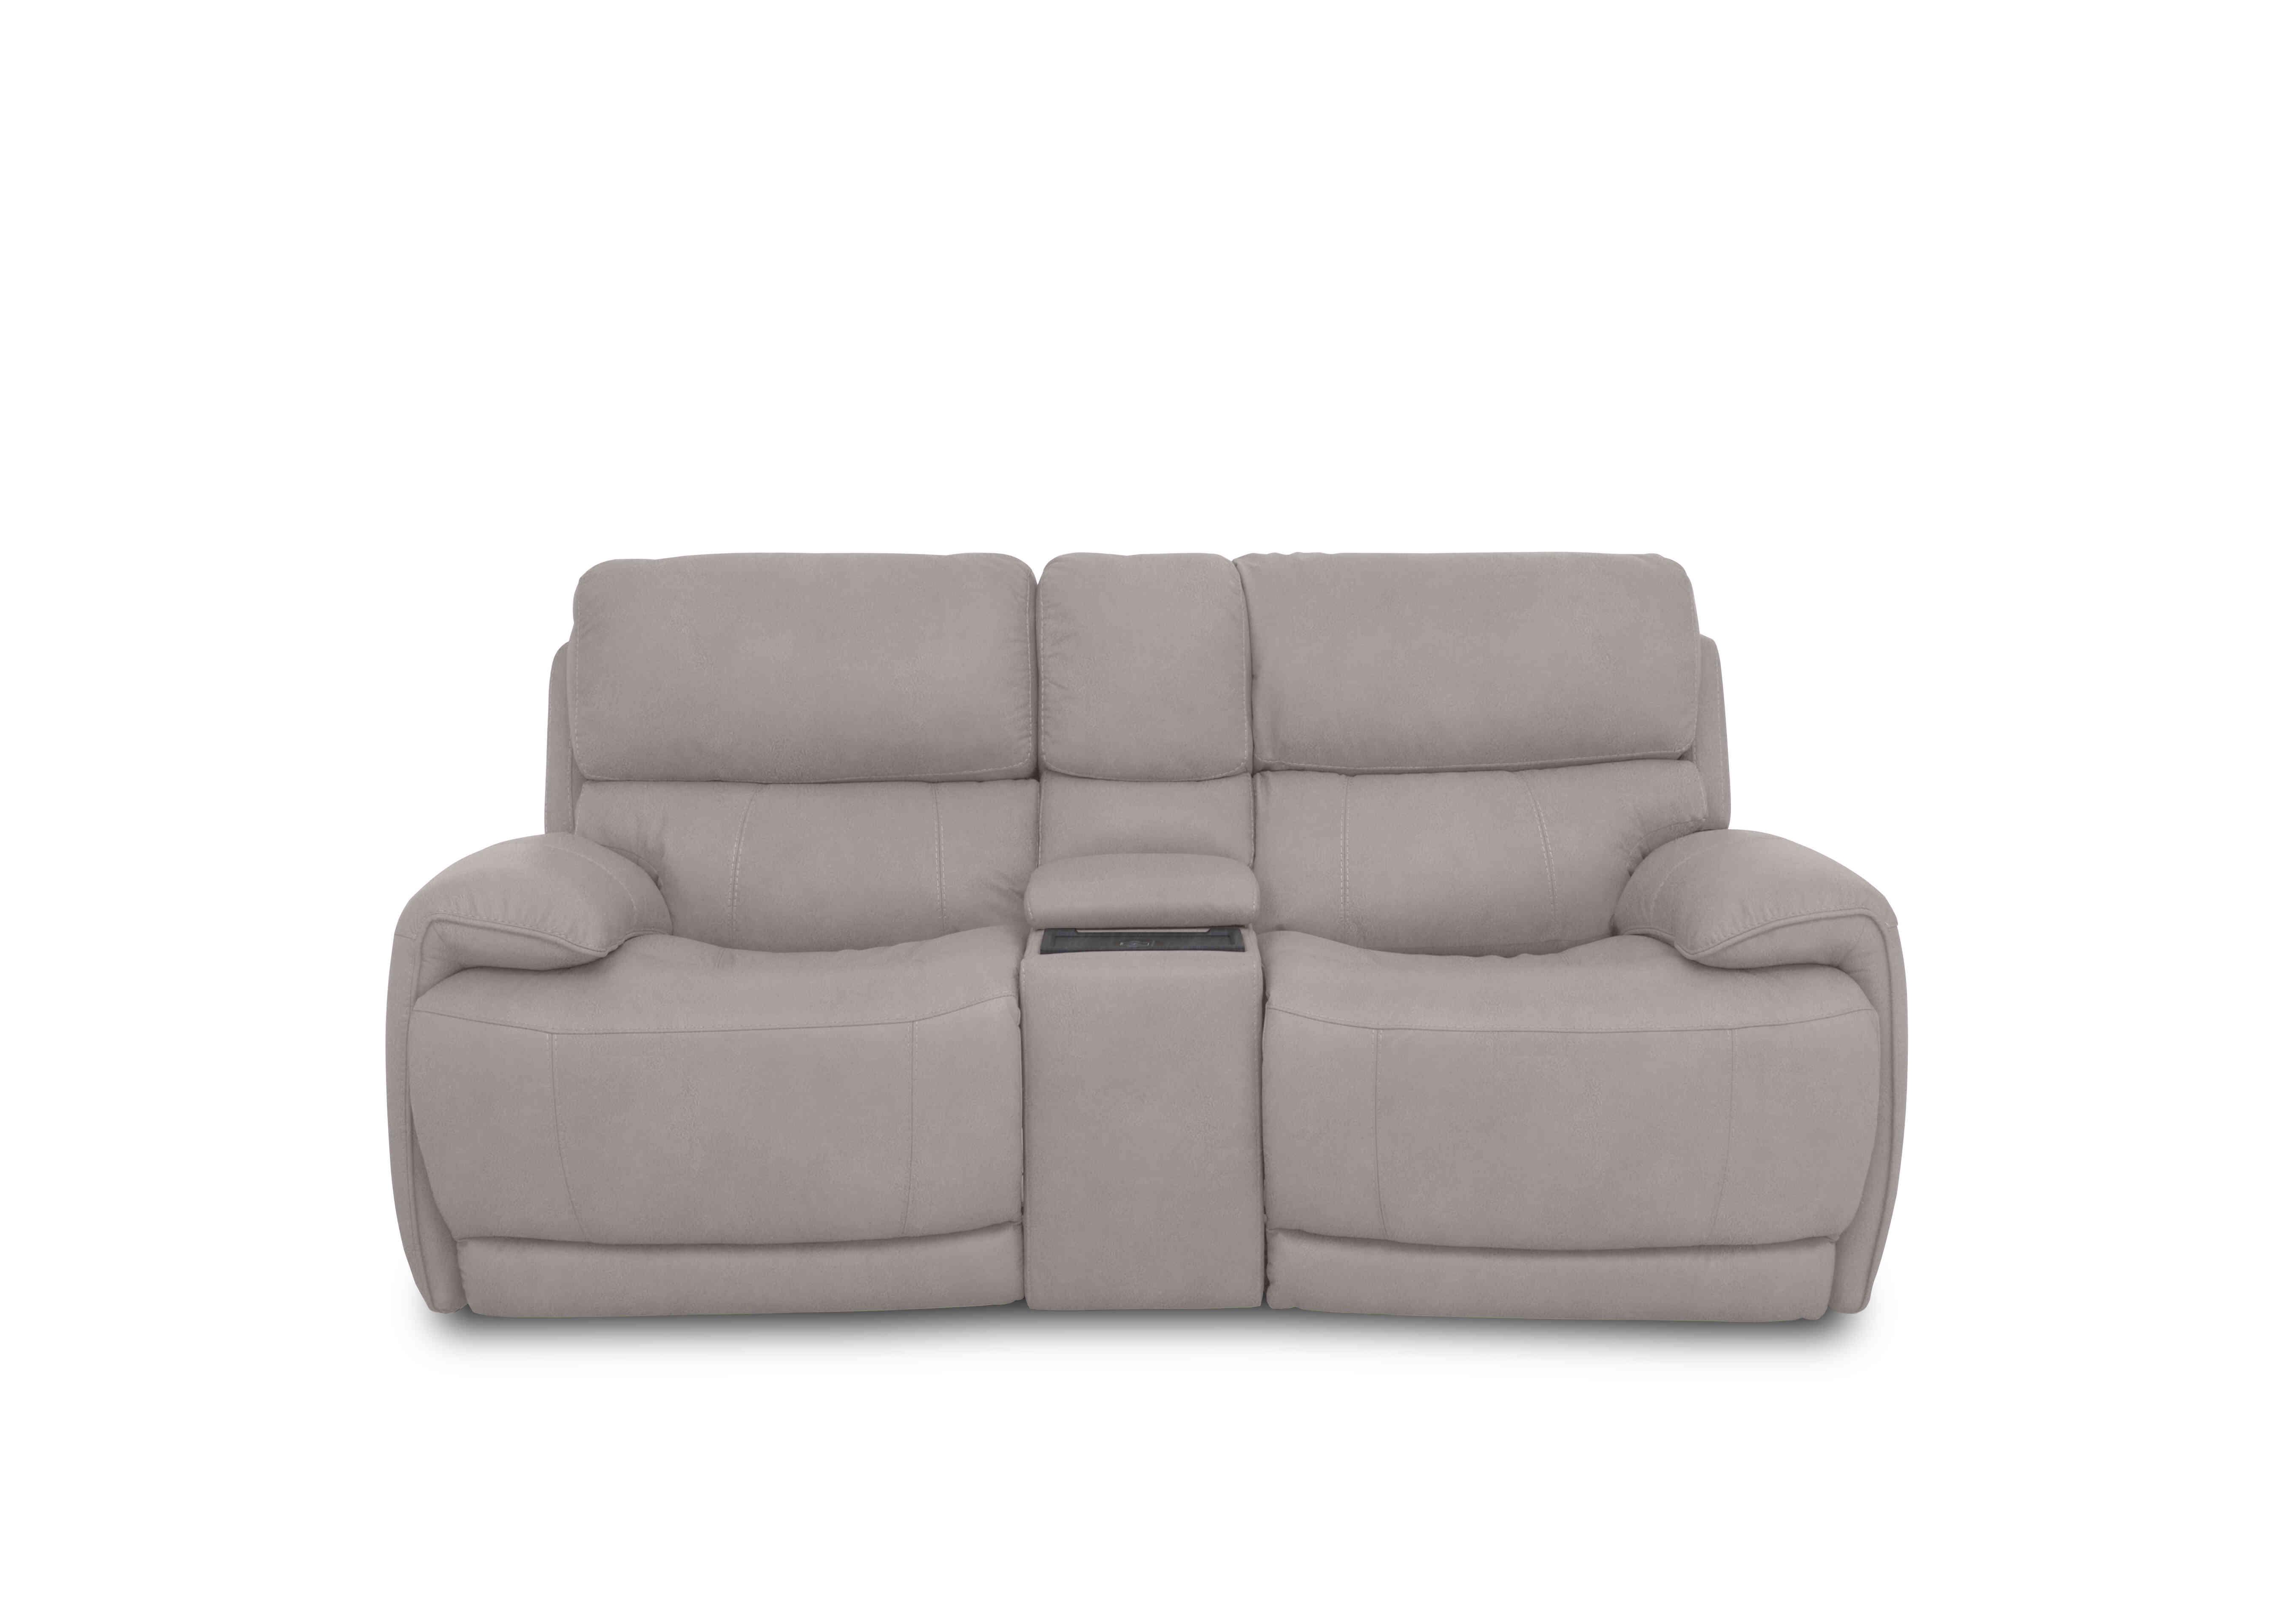 Rocco 2 Seater Fabric Power Rocker Sofa with Cup Holders and Power Headrests in Bfa-Mad-R02 Feather on Furniture Village